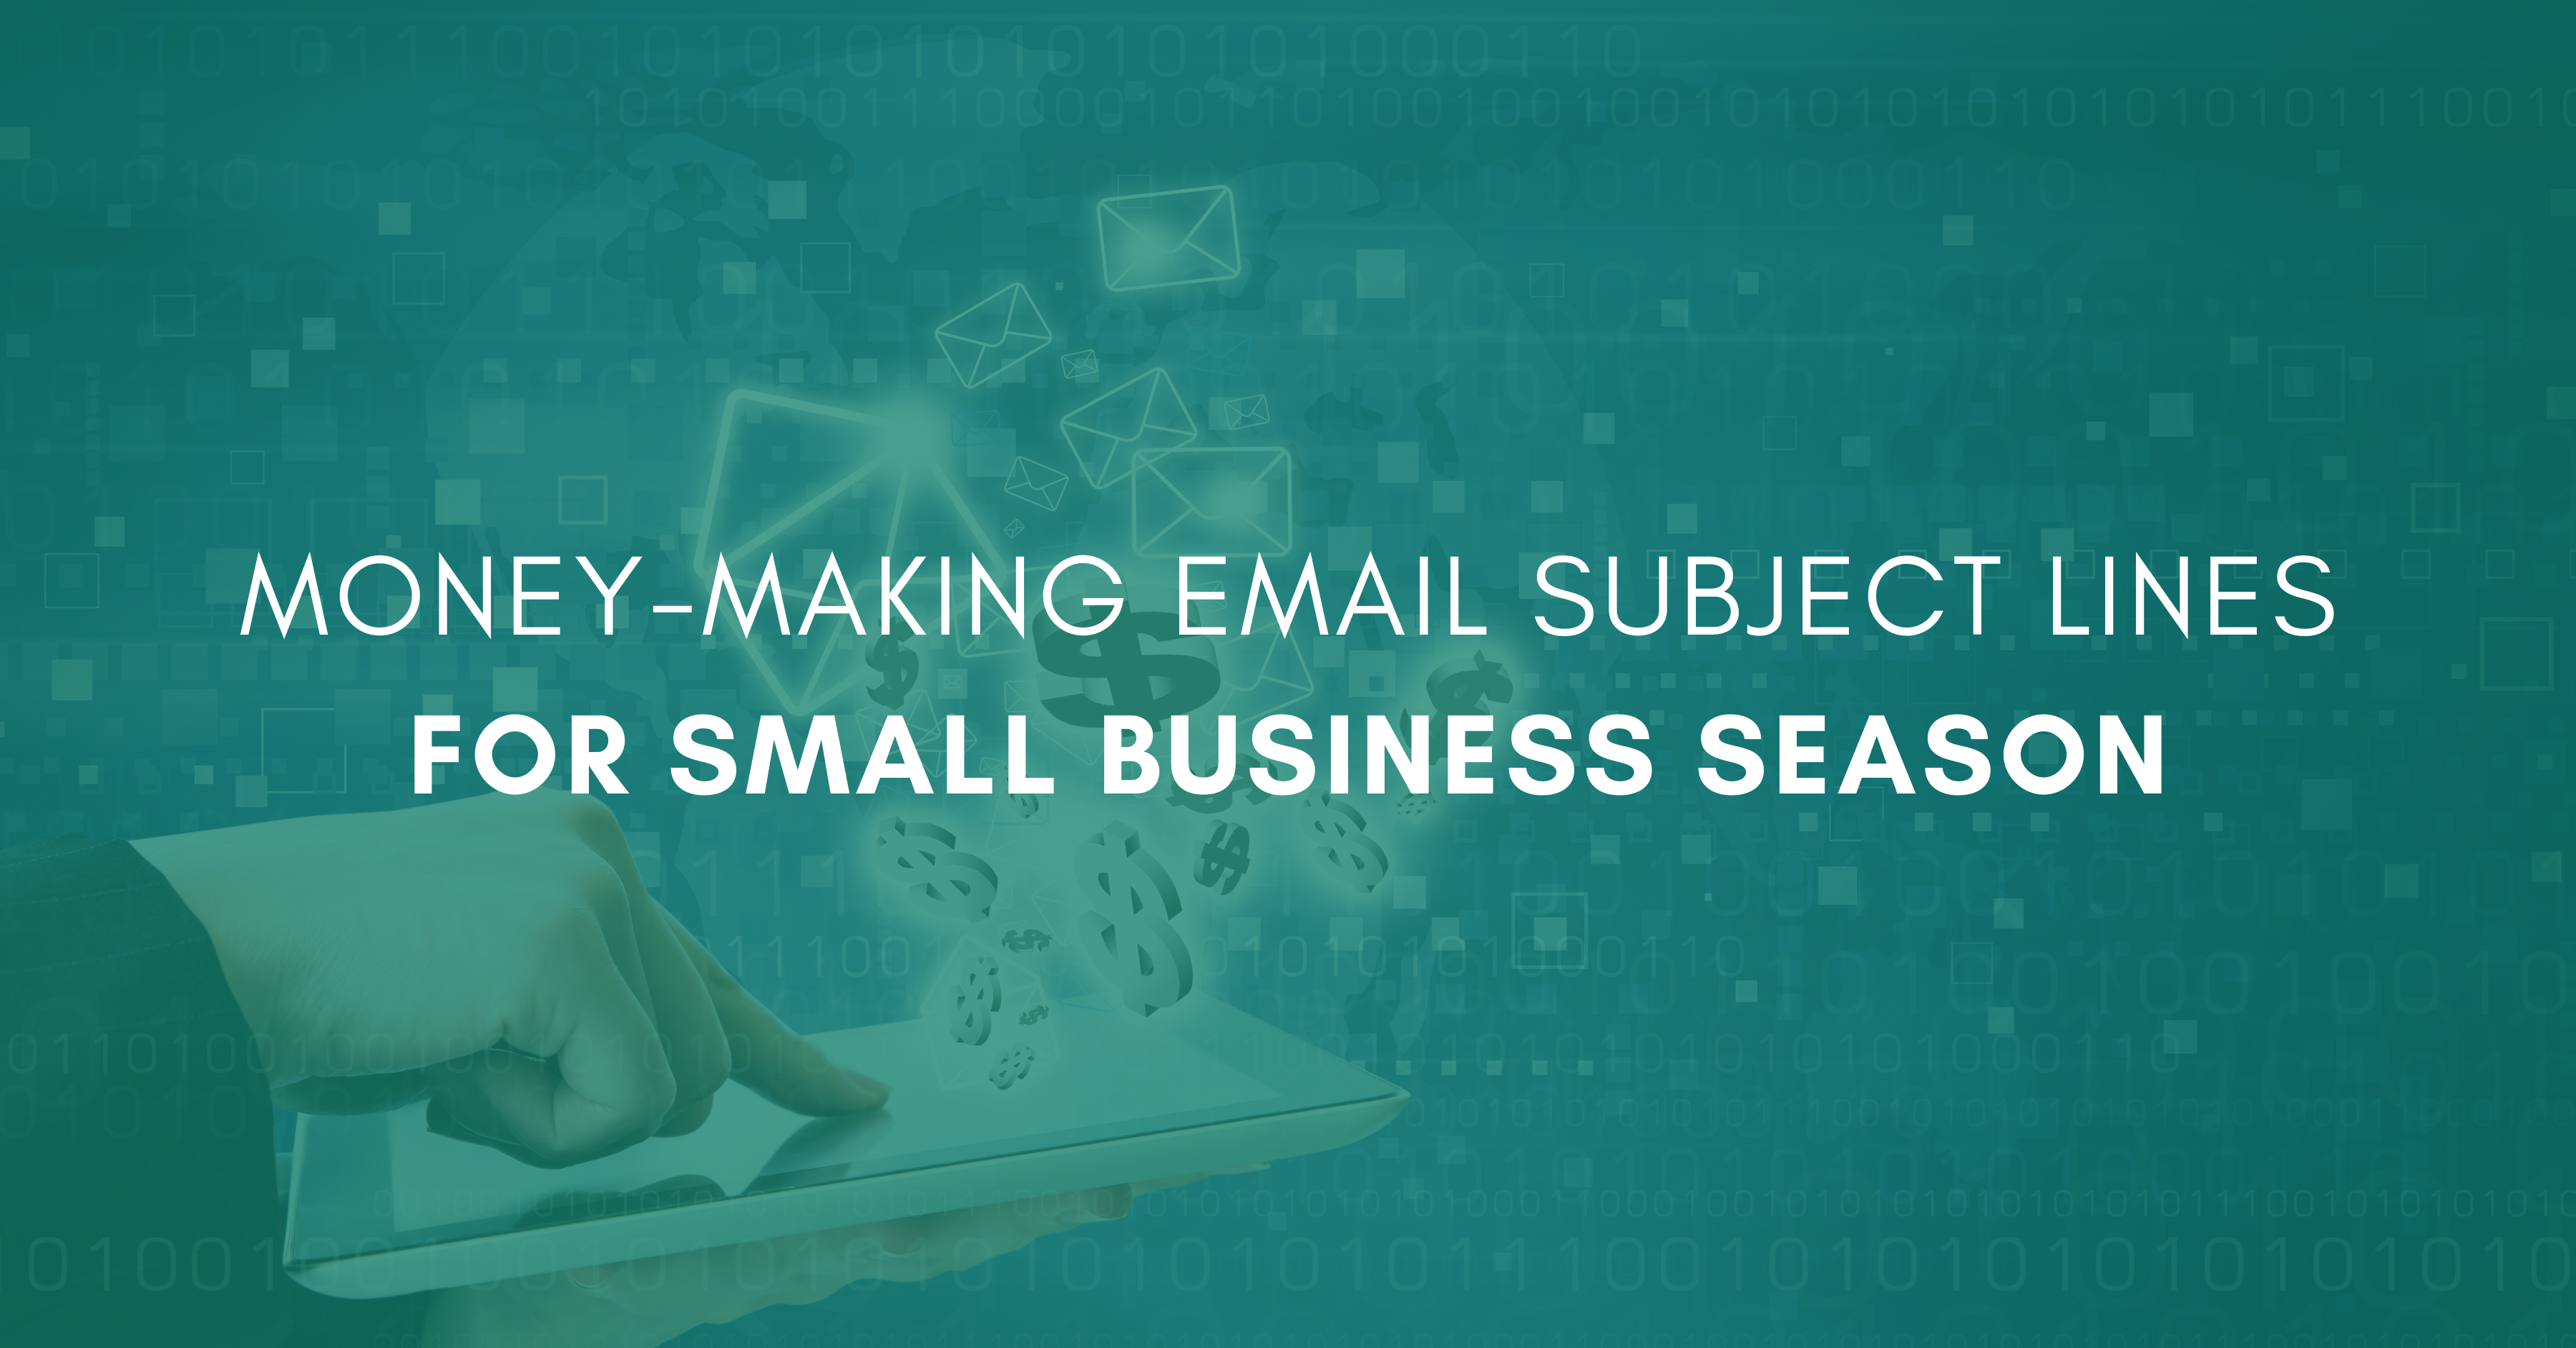 Image for Money-Making Email Subject Lines for Small Business Season